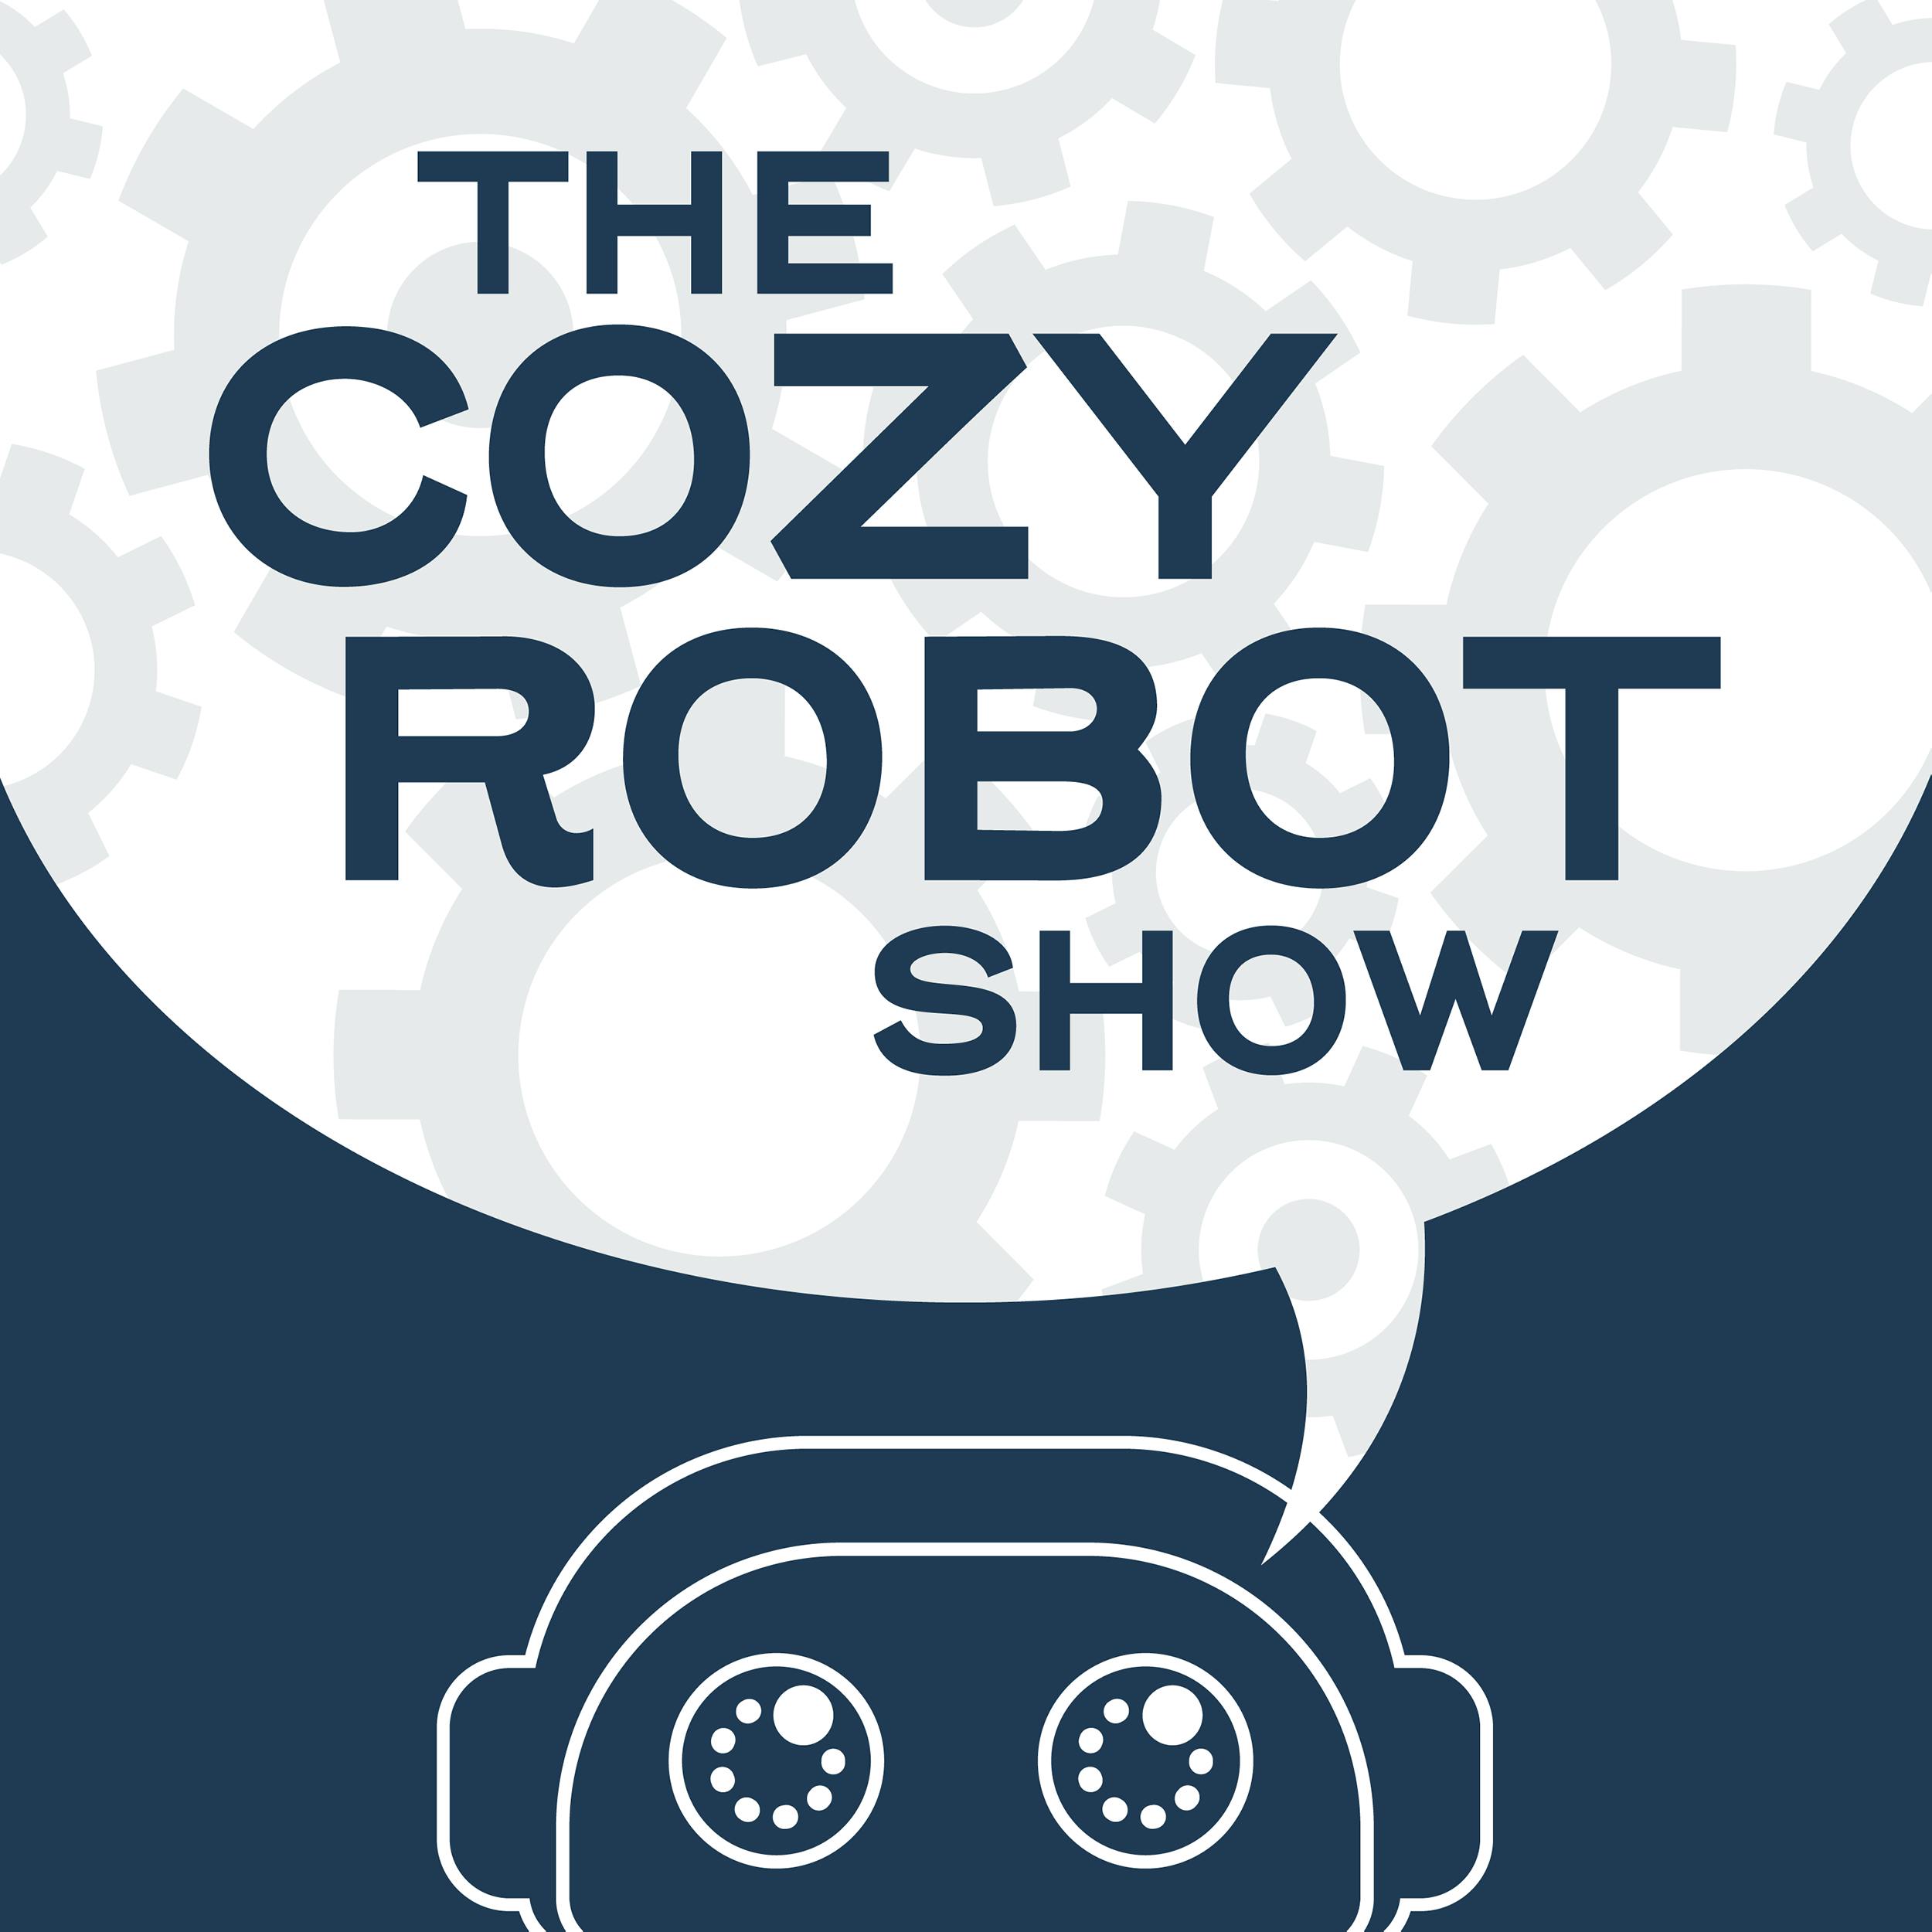 Cozy Robot Show: Mike Answers Your Questions about Gentrification, The Fermi Paradox, Depression, and More